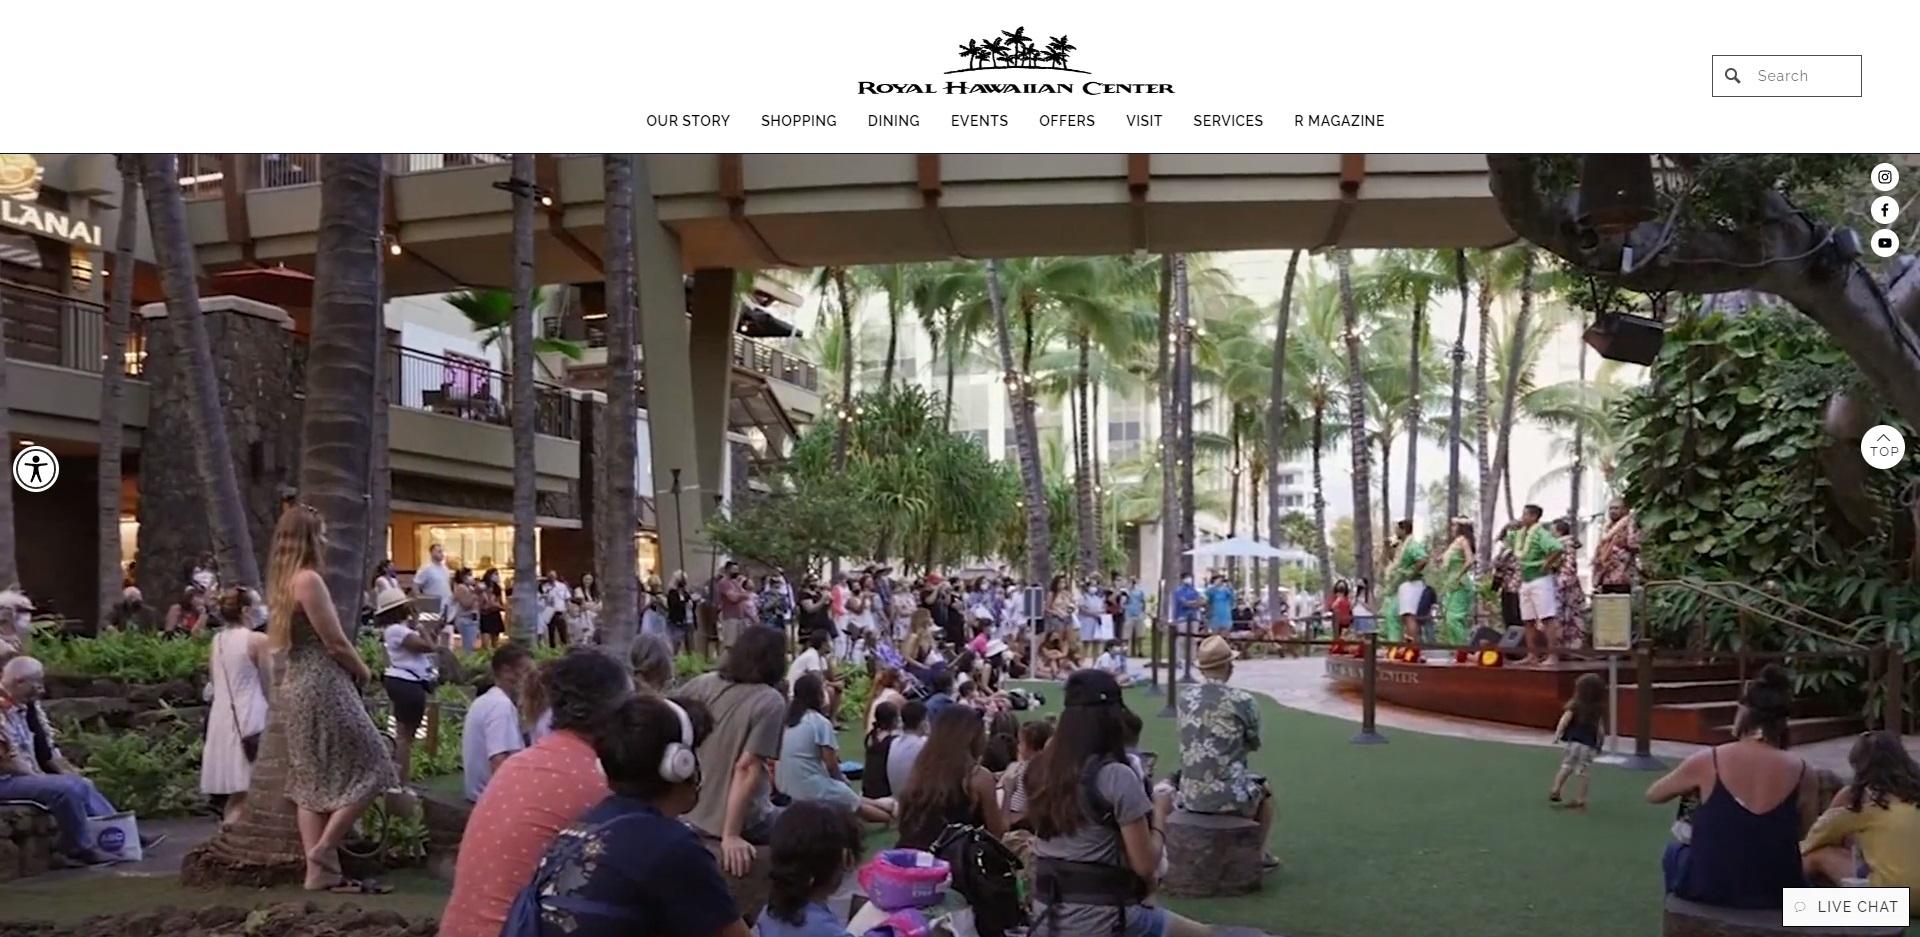 The Best Shopping Centres in Honolulu, HI